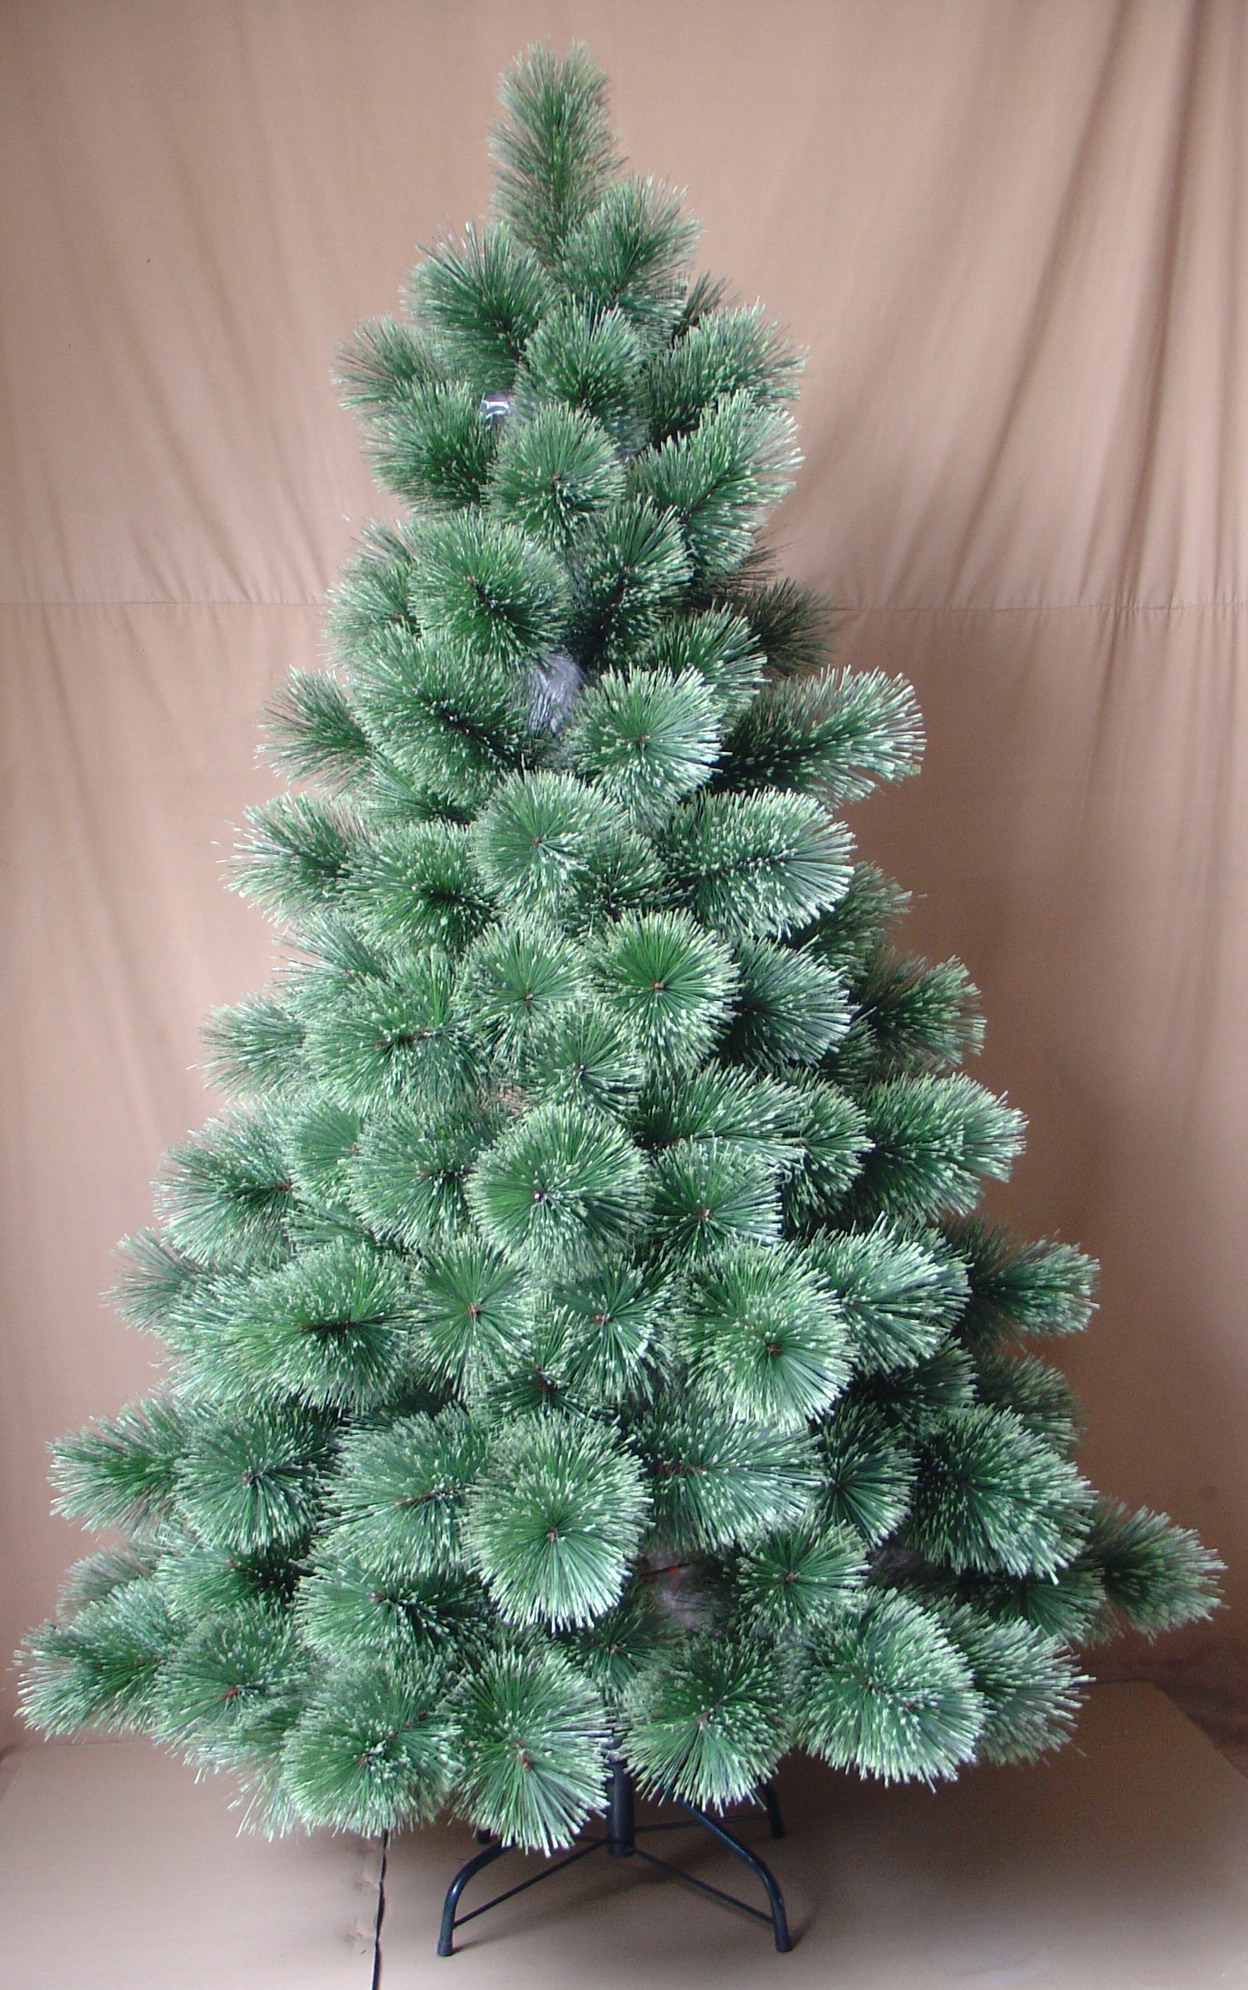 Artificial Christmas Trees Pictures amp Photos